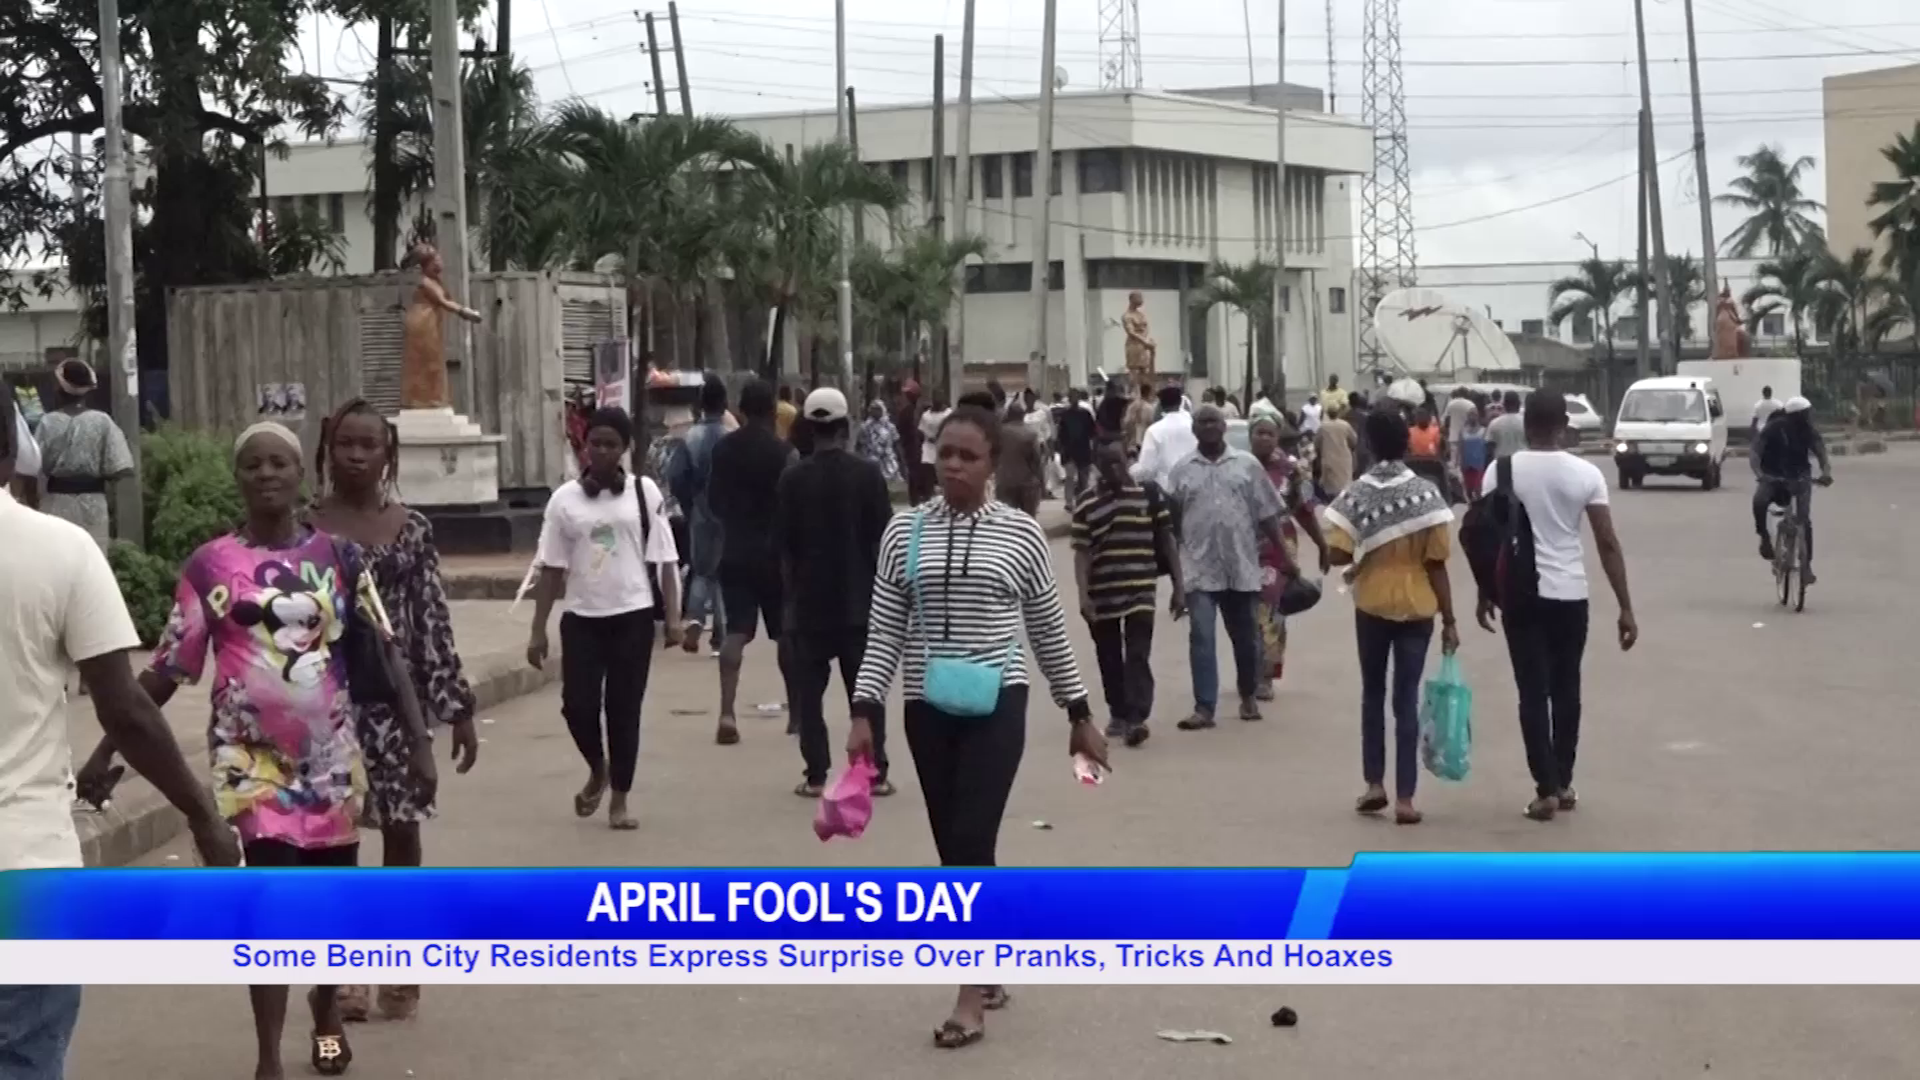 Some Benin City Residents Express Surprise Over Pranks, Tricks And Hoaxes